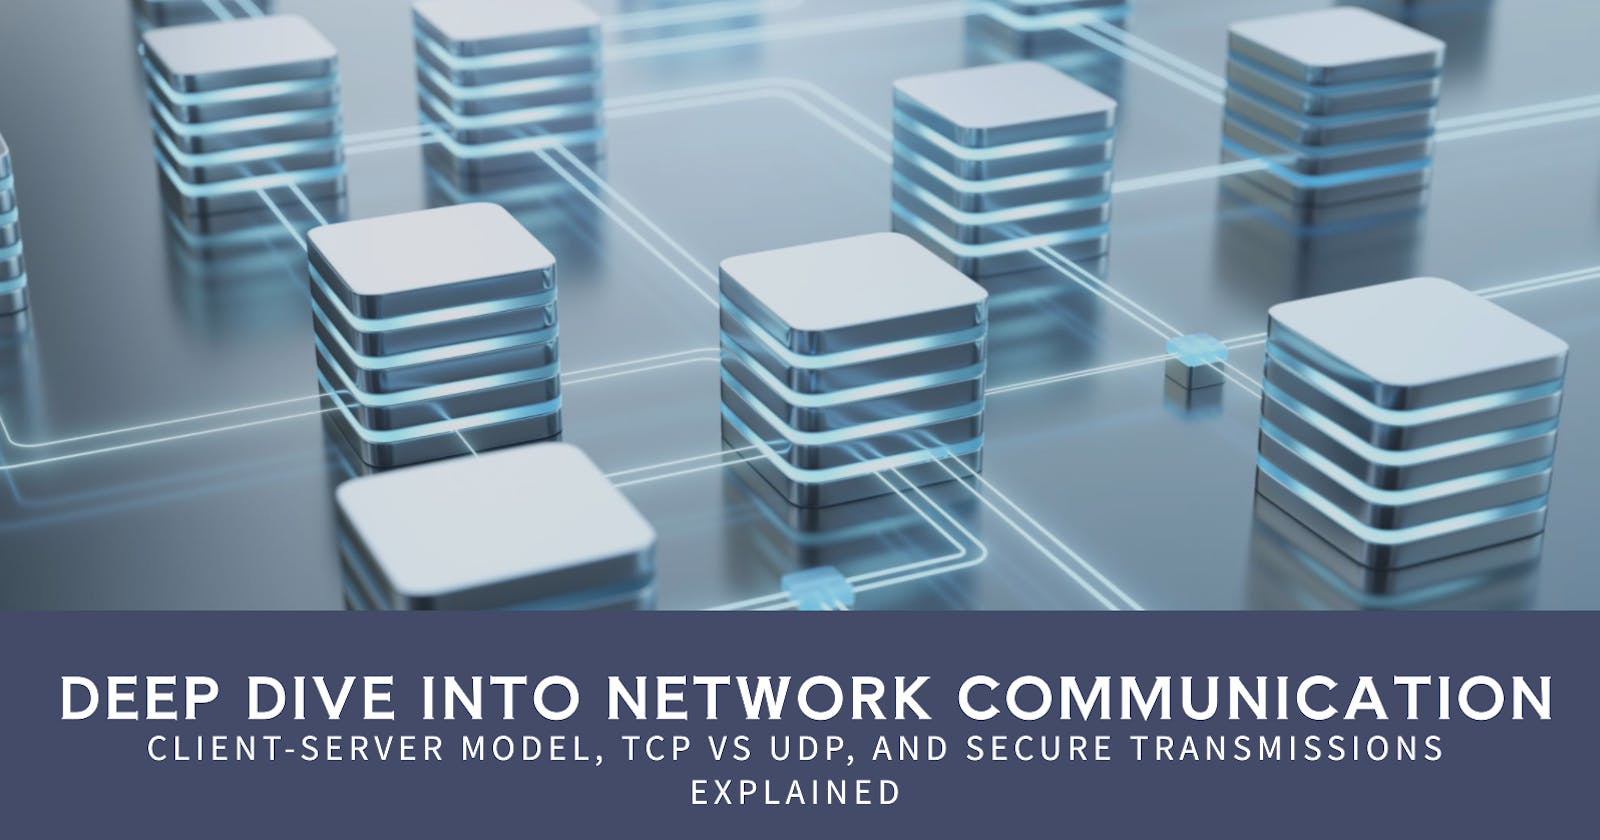 Deep Dive into Network Communication: Client-Server Model, TCP vs UDP, and Secure Transmissions Explained